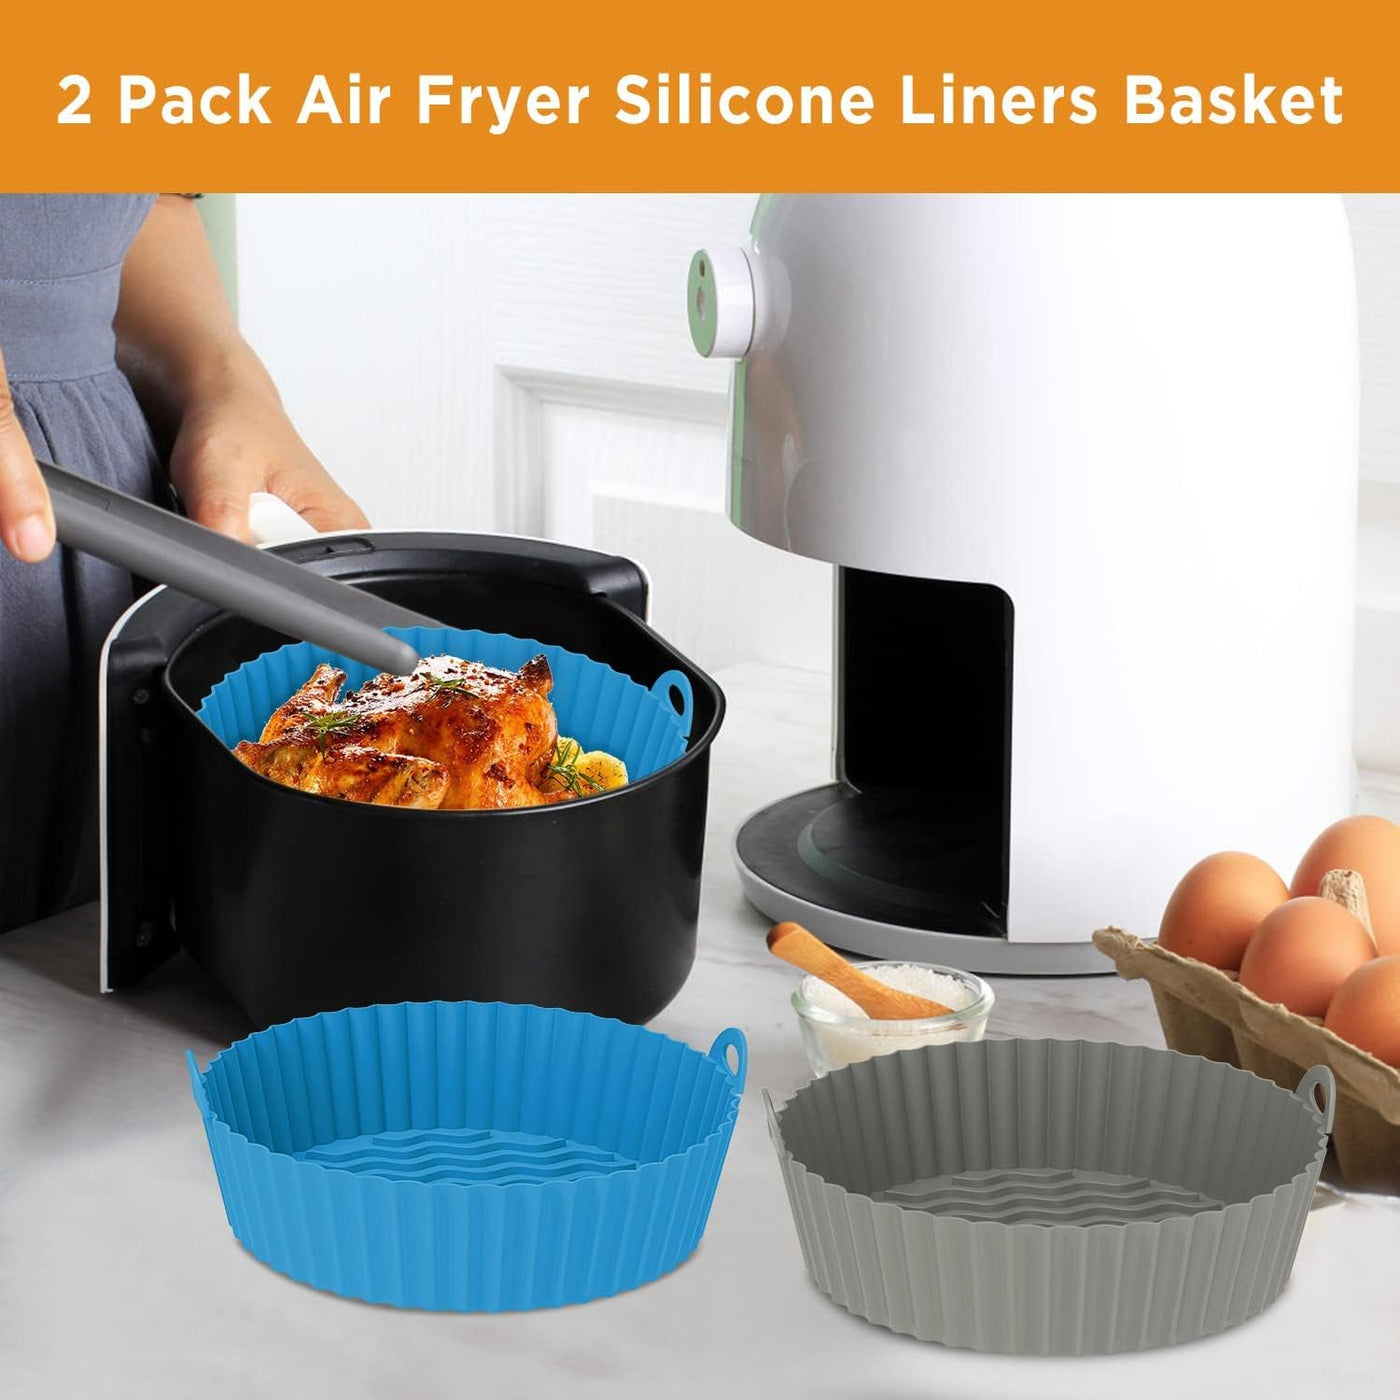 OUTXE Silicone Air Fryer Liners, 2-Pack Reusable Airfryer Basket Tray Accessories Round Compatible With Ninja Cosori Gourmia Instant Pot 5.8/6/7/8/9 qt (Blue+Gray)